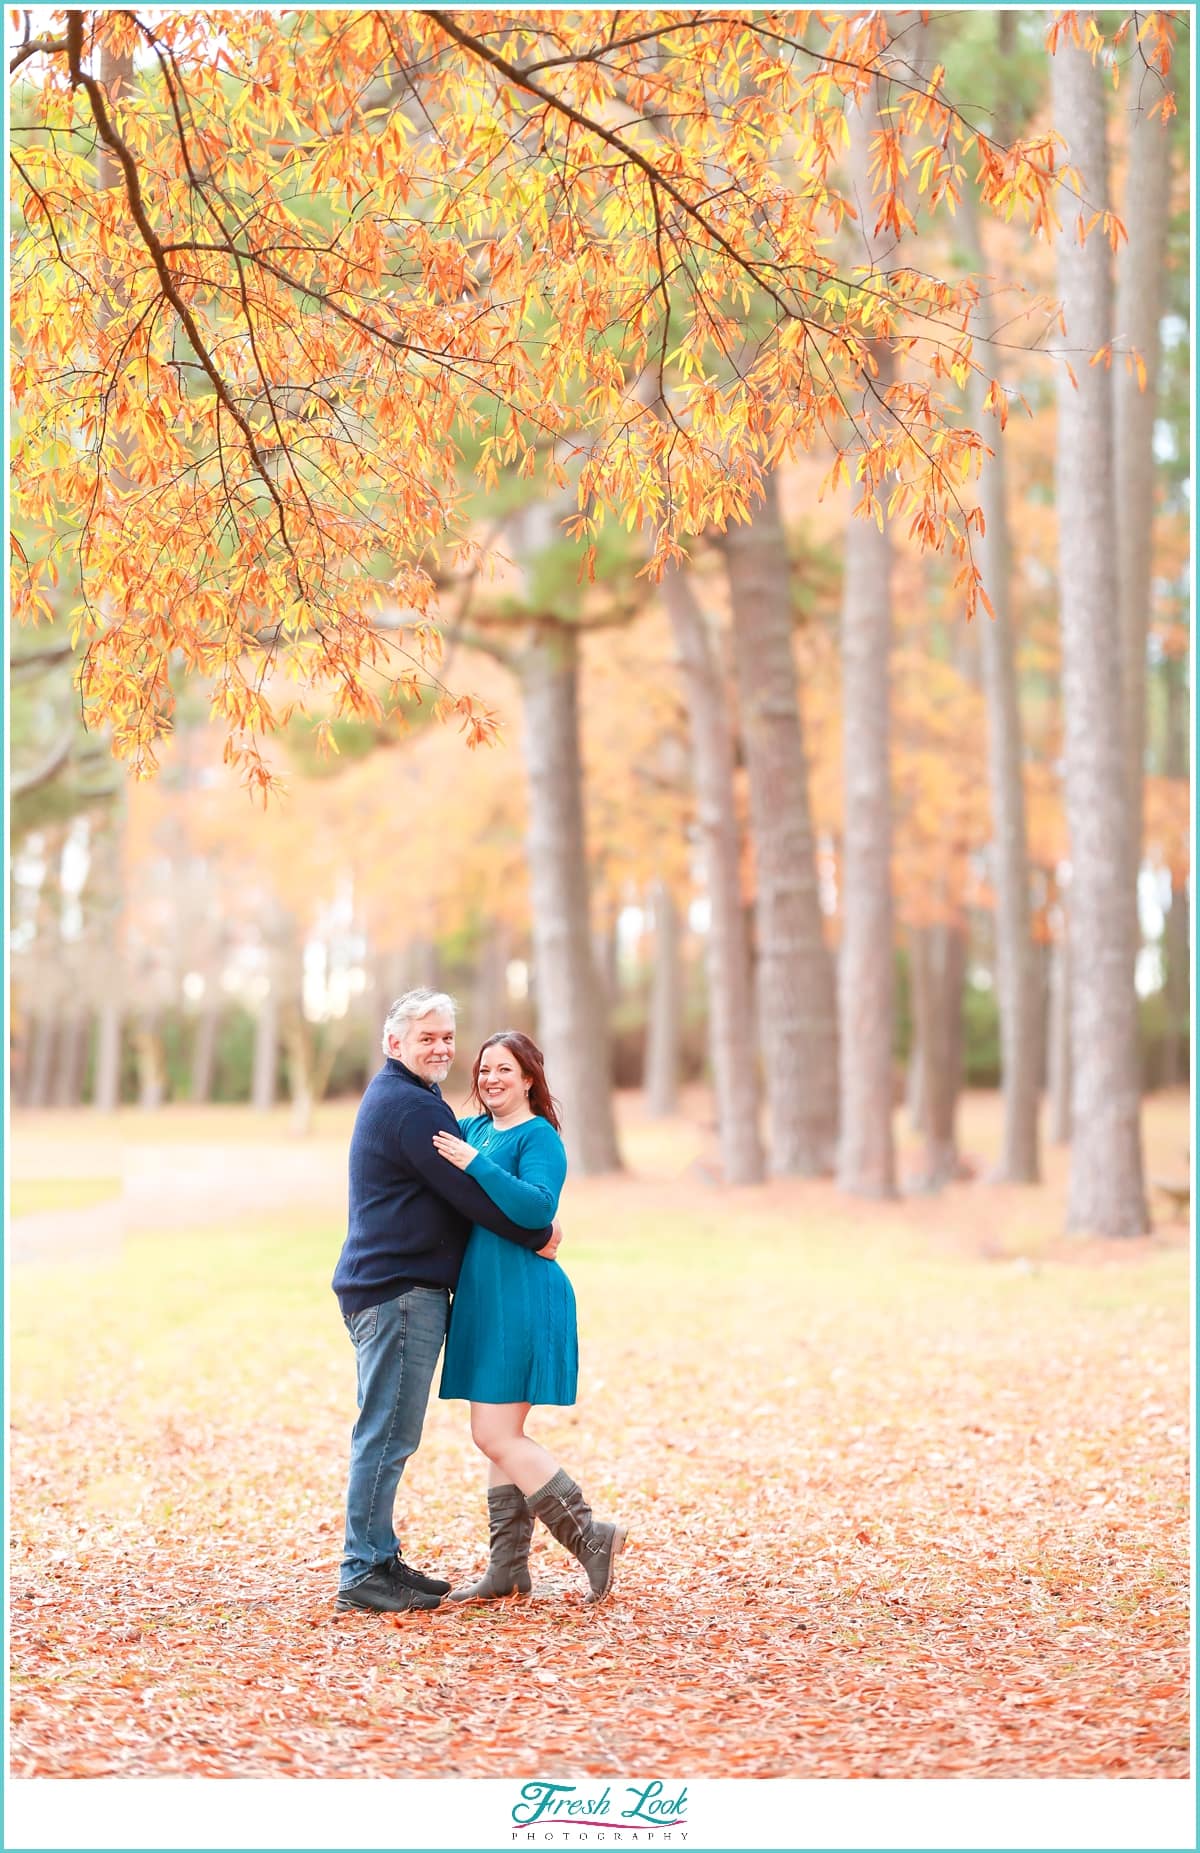 Fall Engagement Photoshoot in the Woods